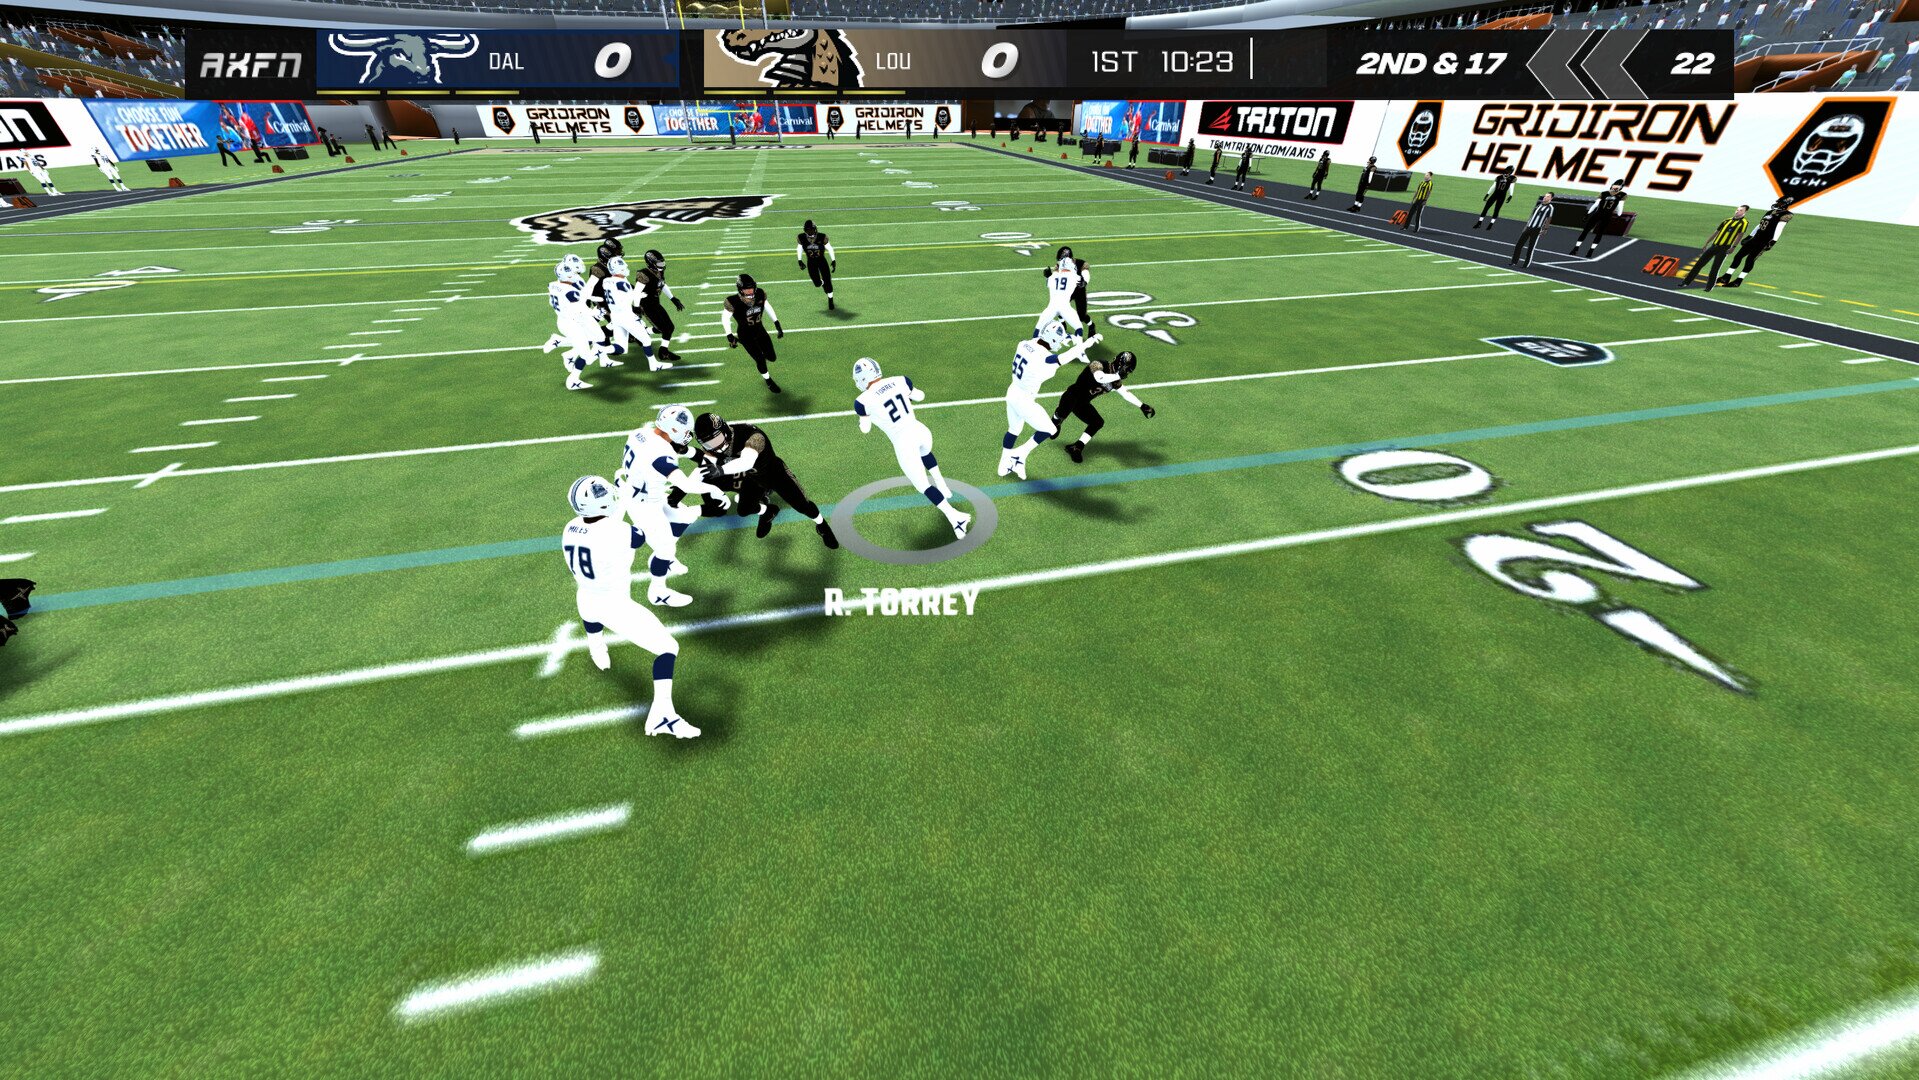 Axis Football 2024 Free Download » ExtroGames